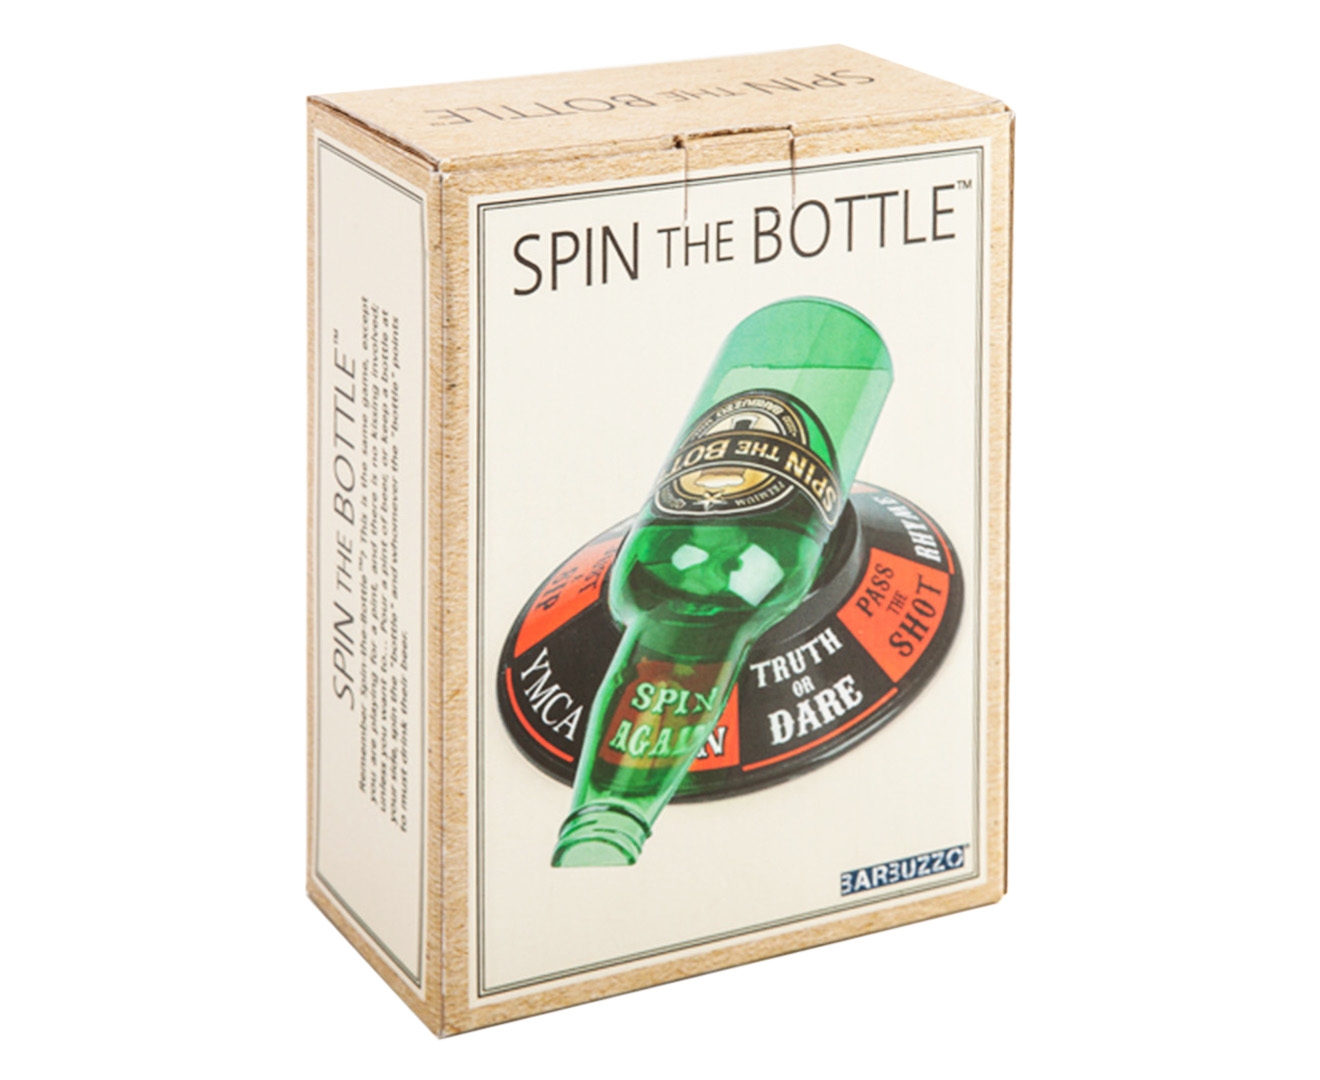 Spin the bottle strip